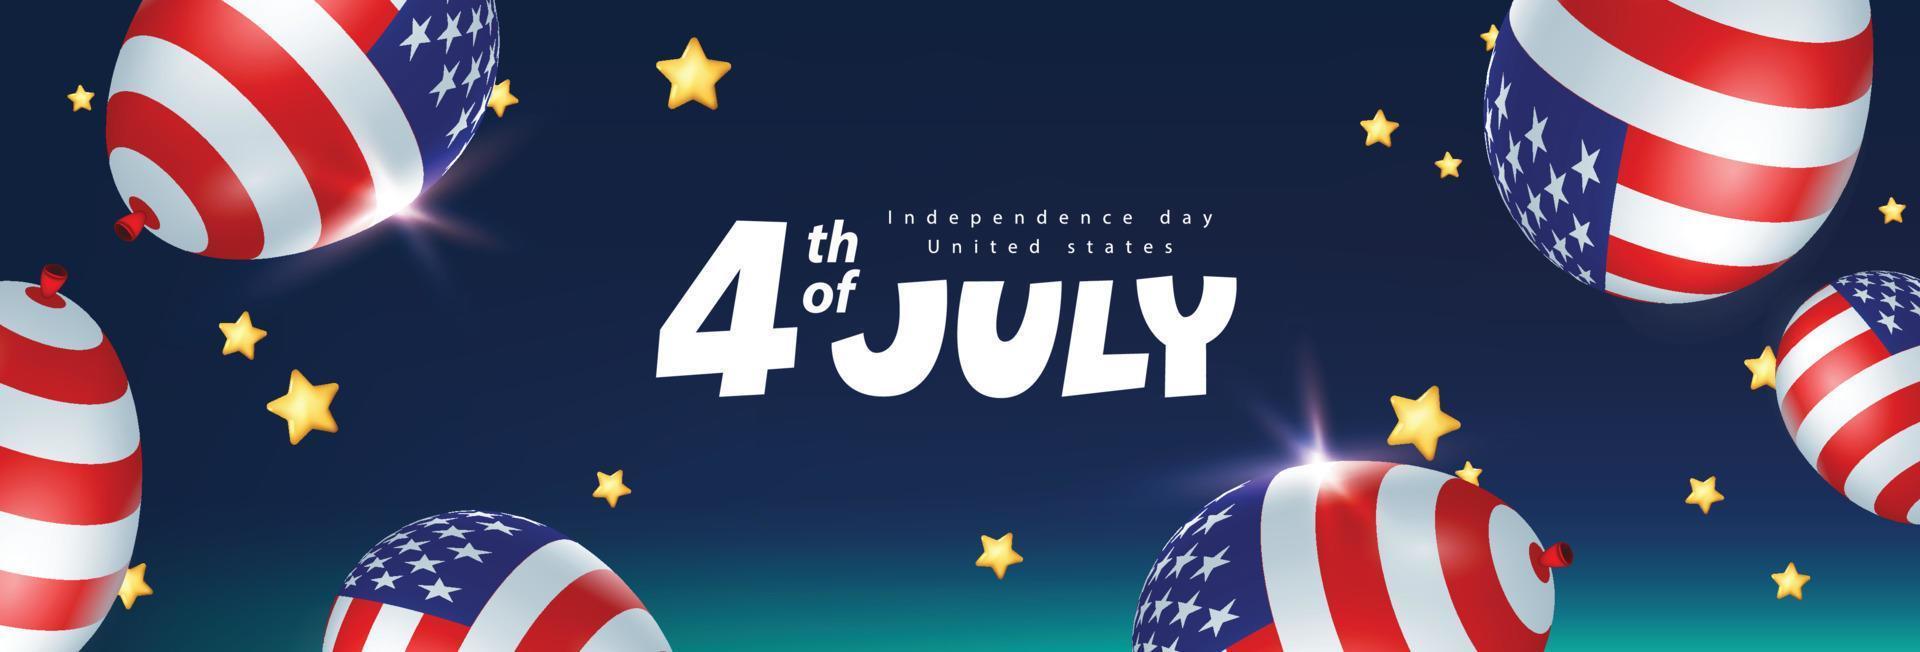 Independence day USA celebration banner in night sky with american balloons and gold stars vector